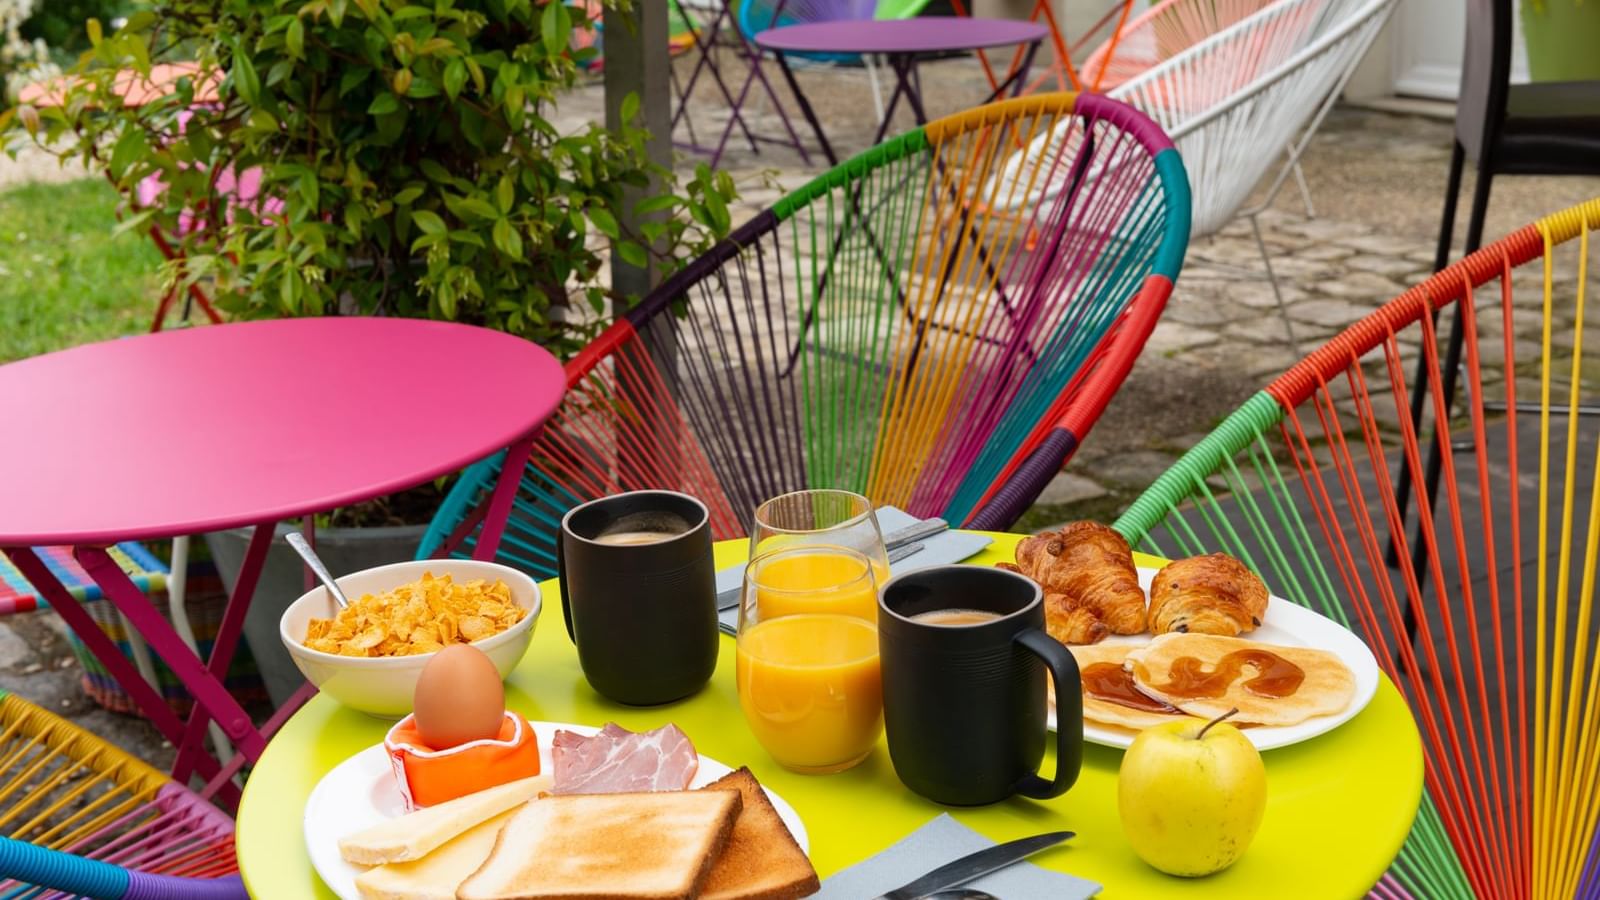 Breakfast & drinks served outdoors at The Originals Hotels